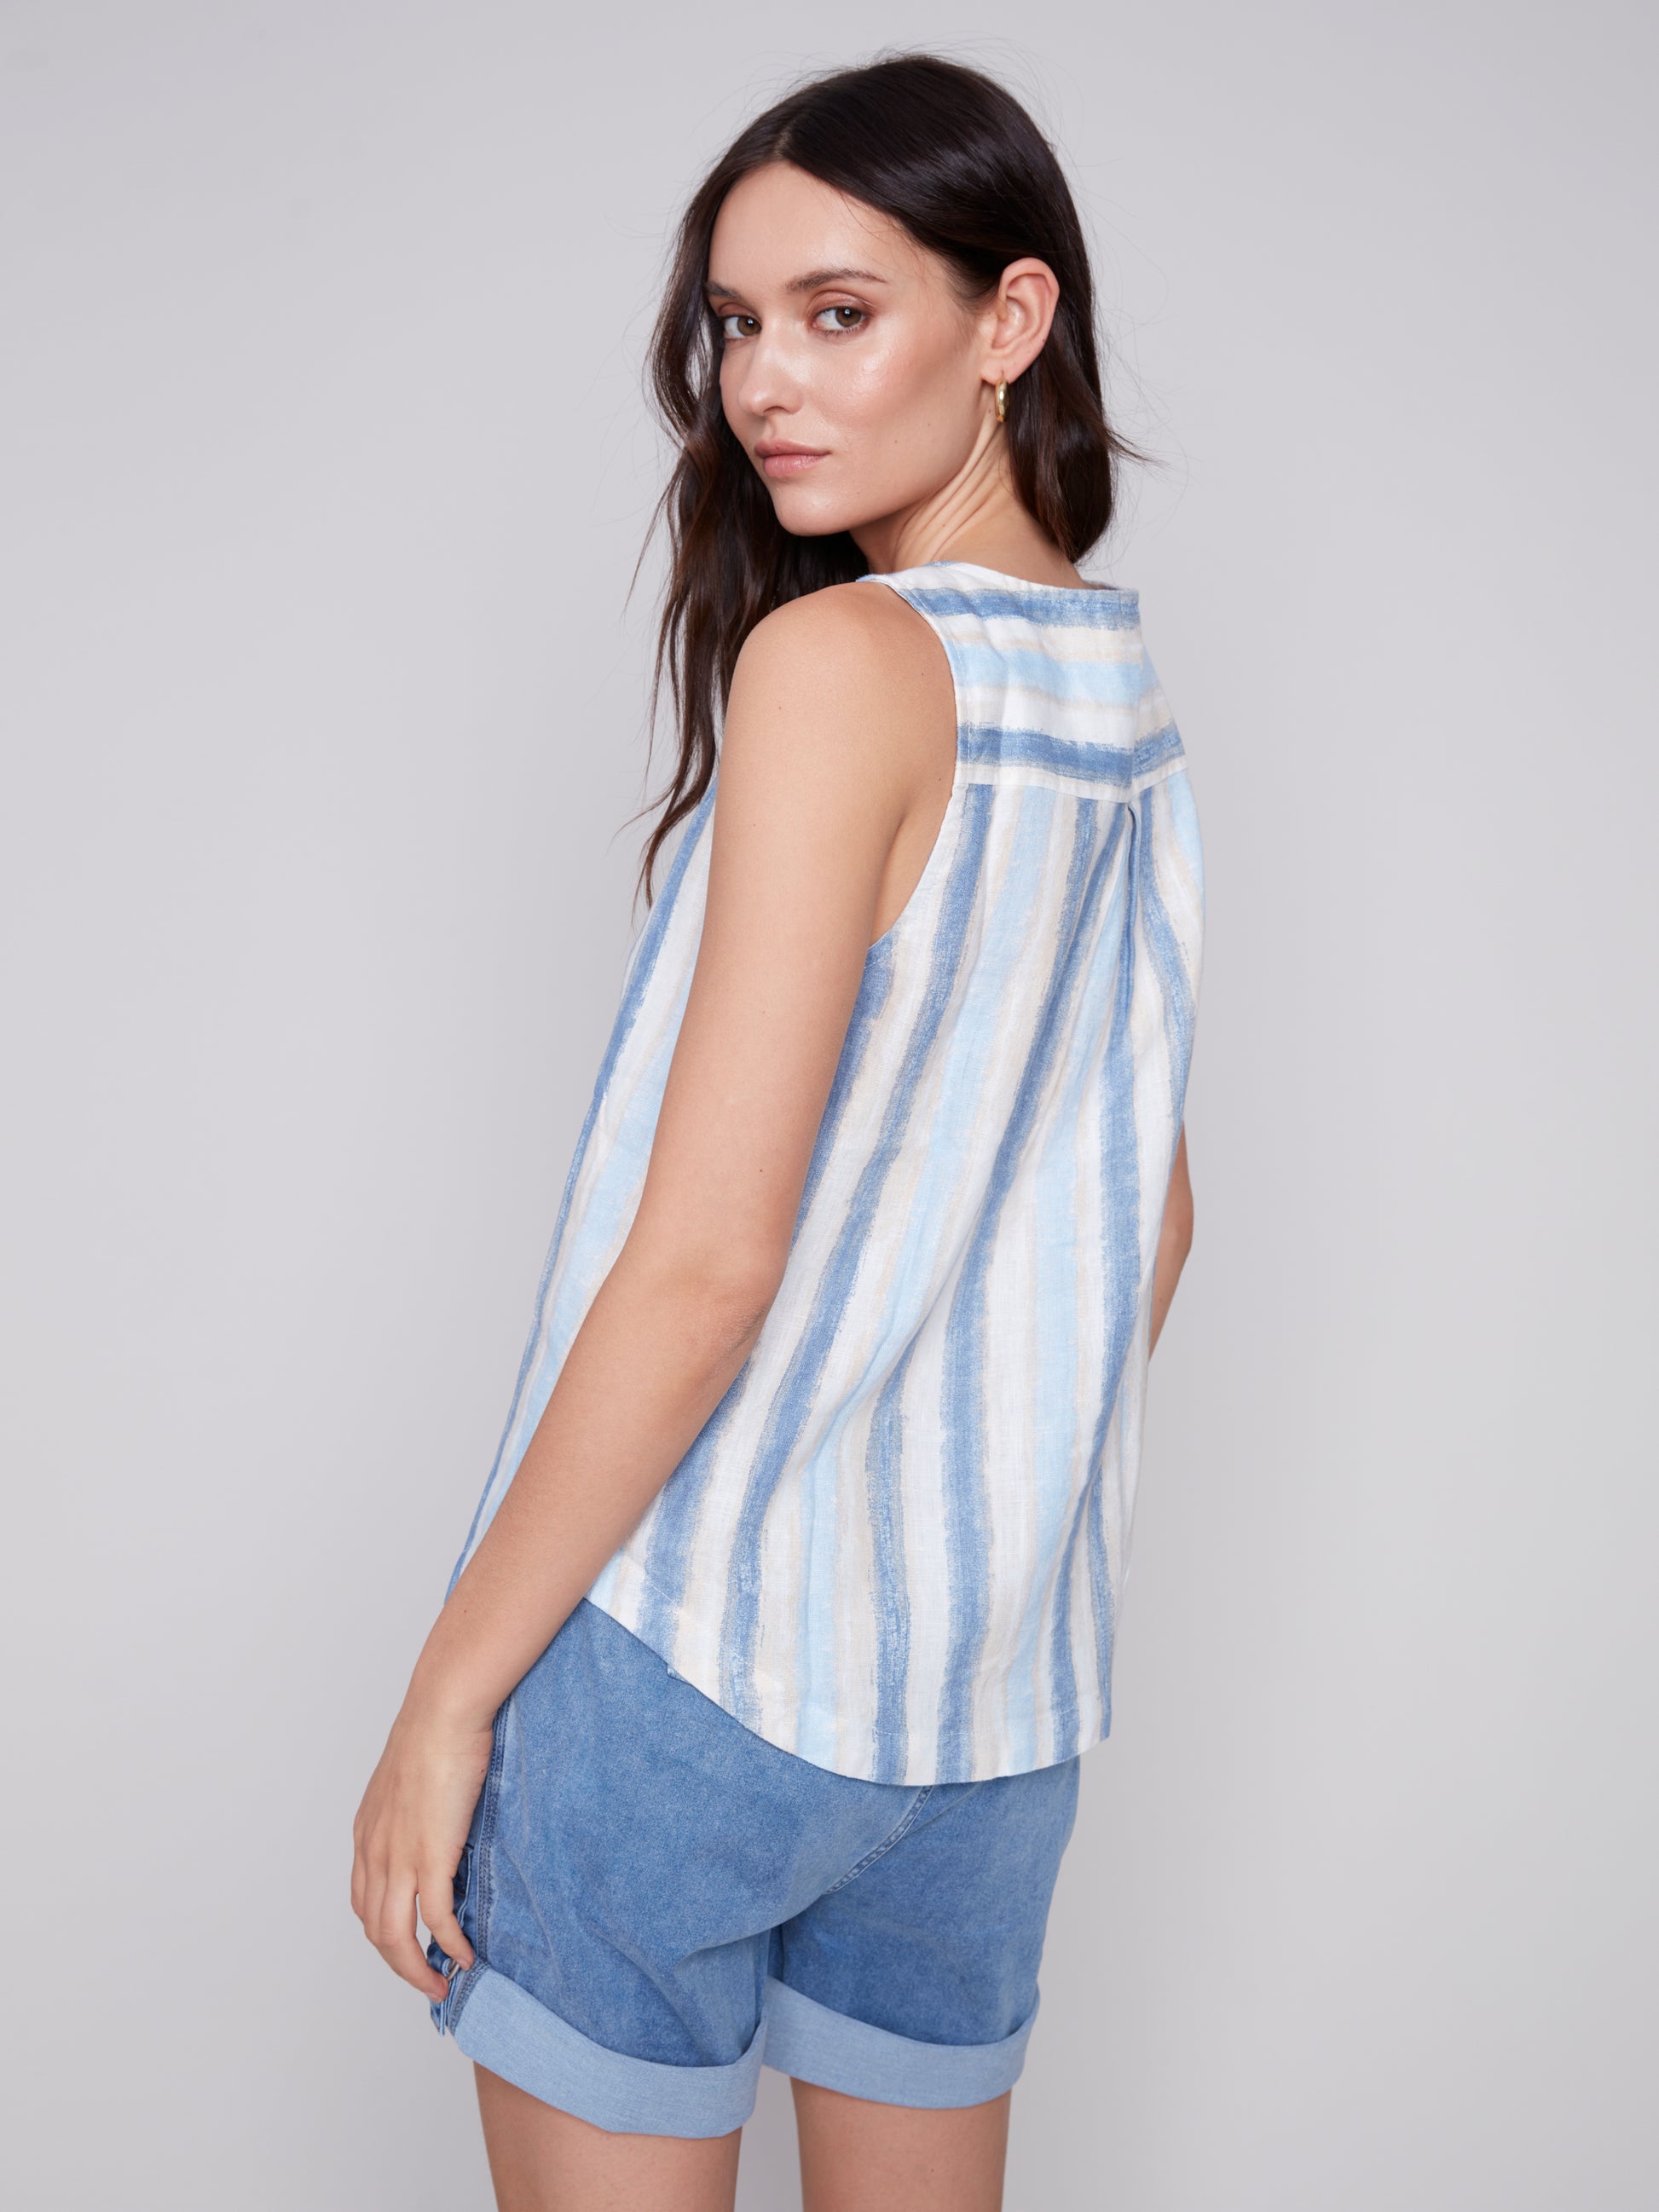 The model is wearing a stylish Charlie B Linen Top with Side Buttons in blue stripes.